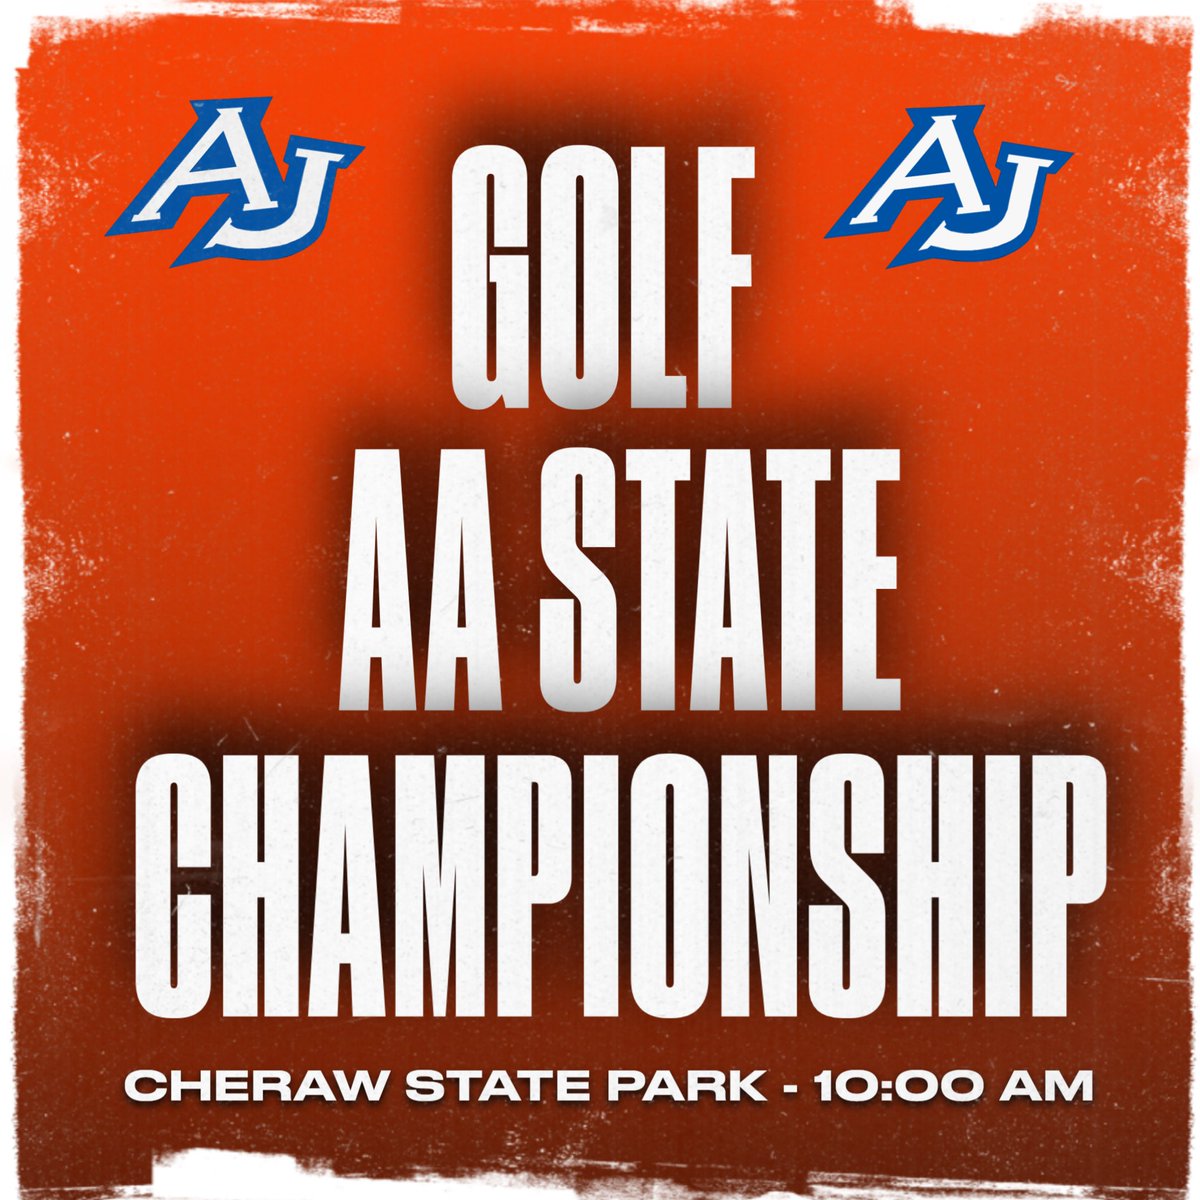 AJ Golf ..... Good luck to our boys competing in the AA State Championship today in Cheraw at the Cheraw State Park Golf Course.

Results to follow later today.

#GoVols